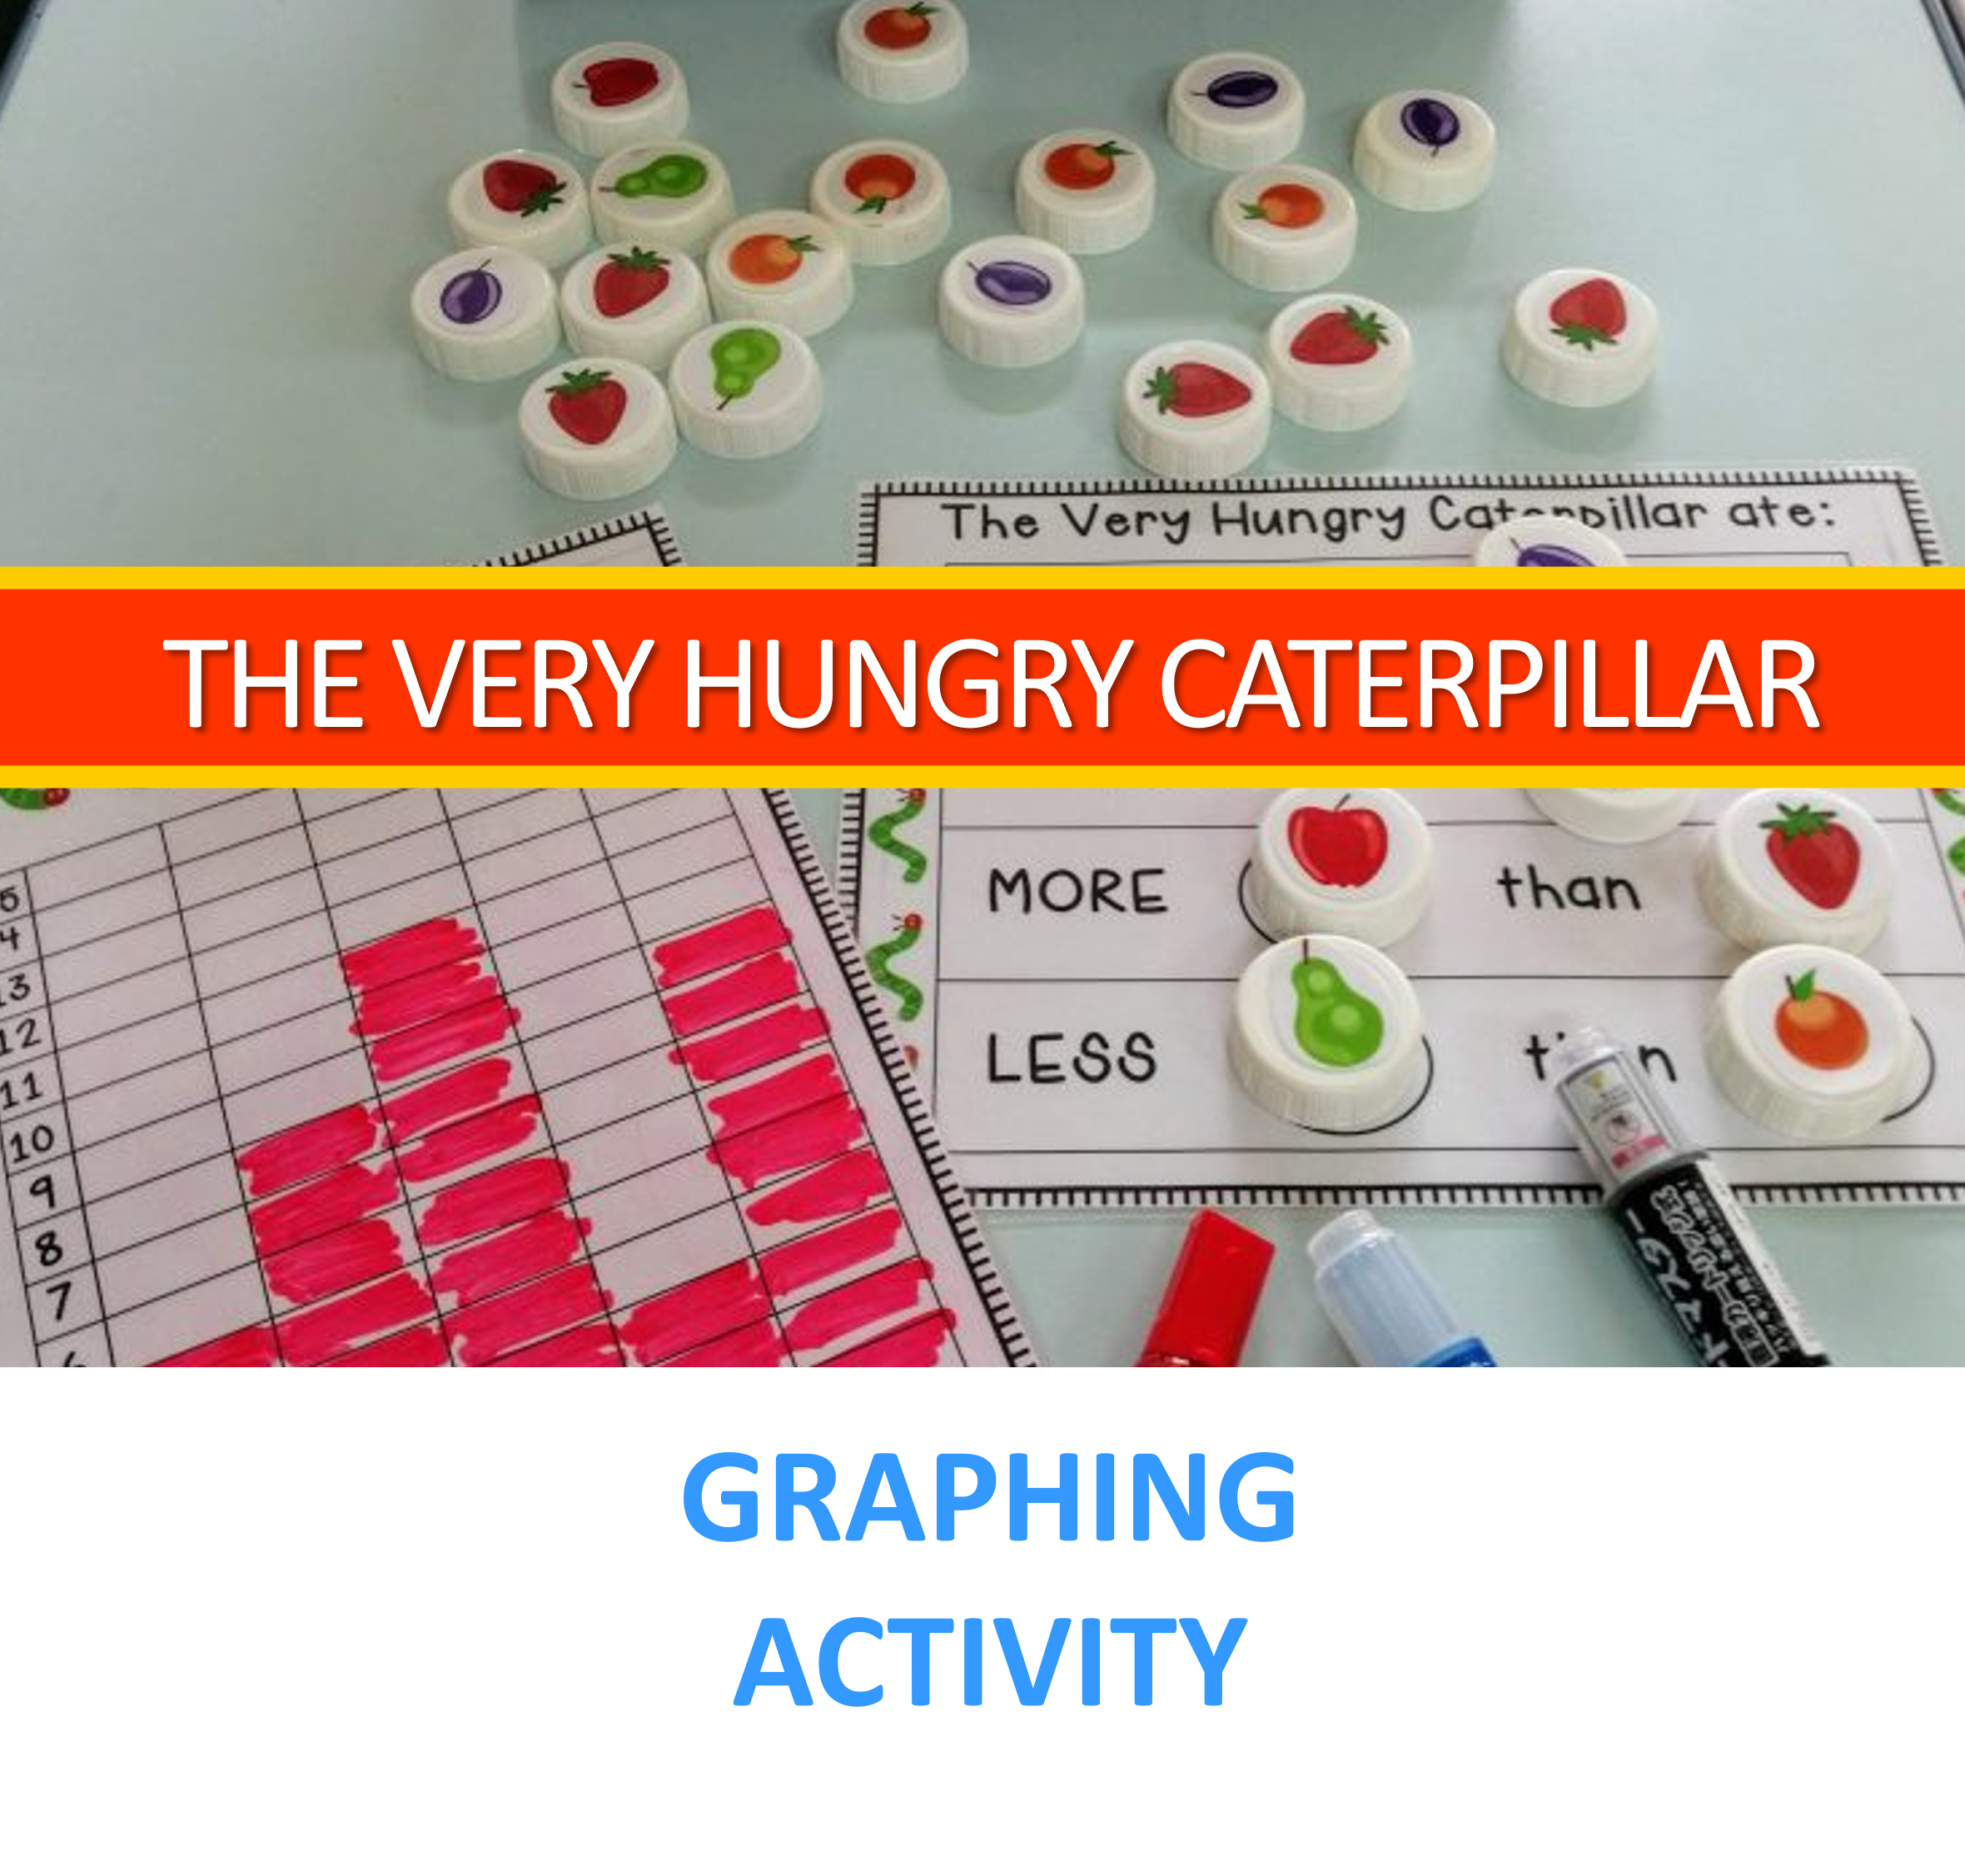 The Very Hungry Caterpillar Activity